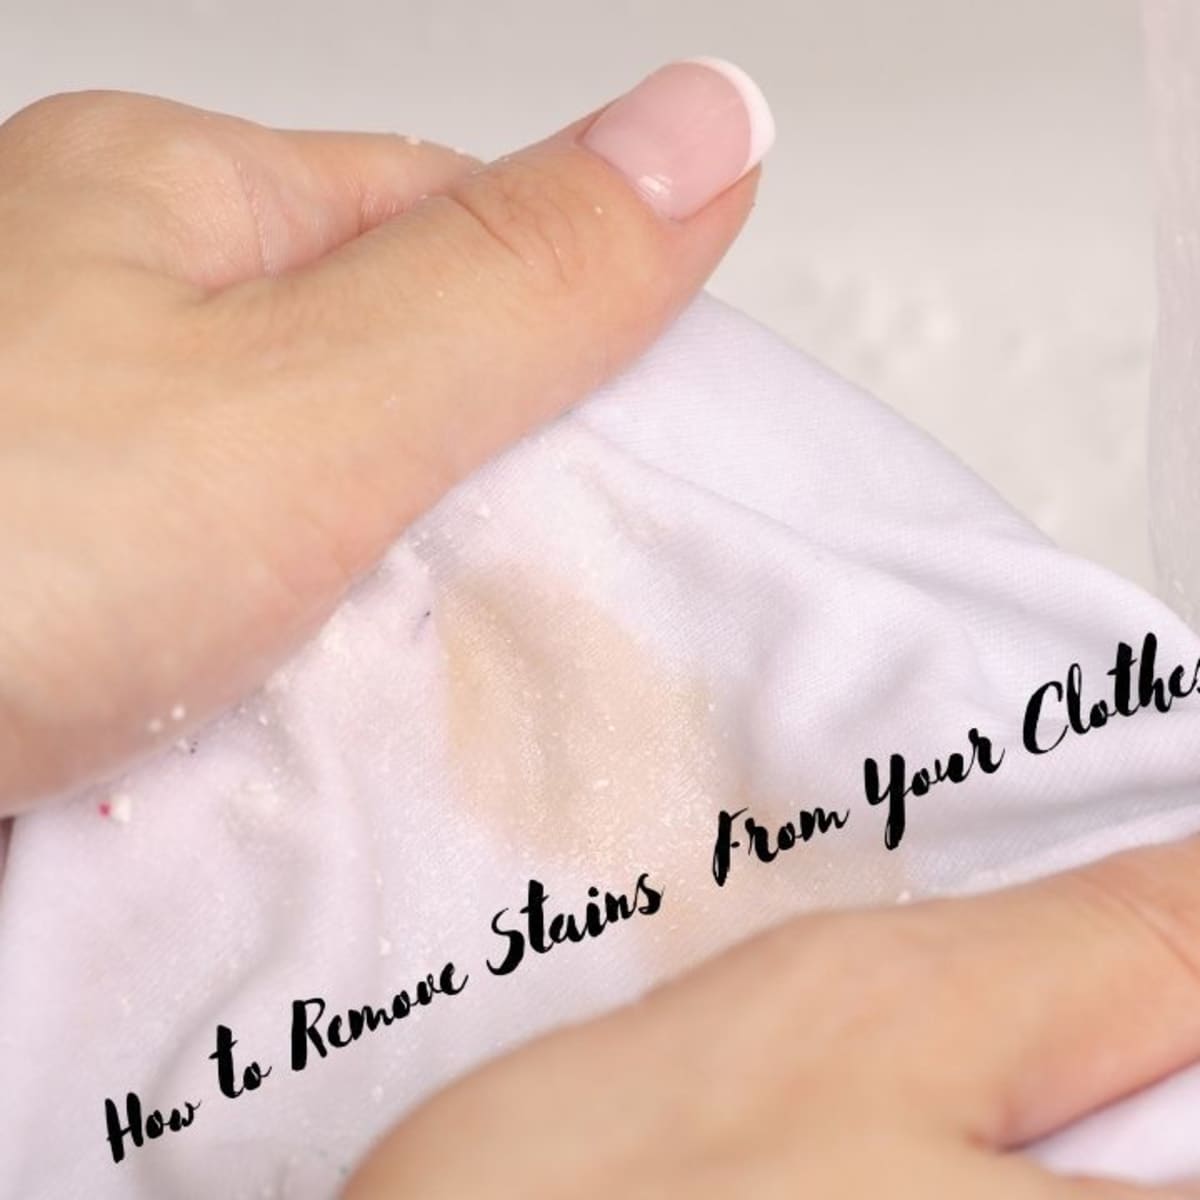 How to remove ink stains from clothes? - WD40 India